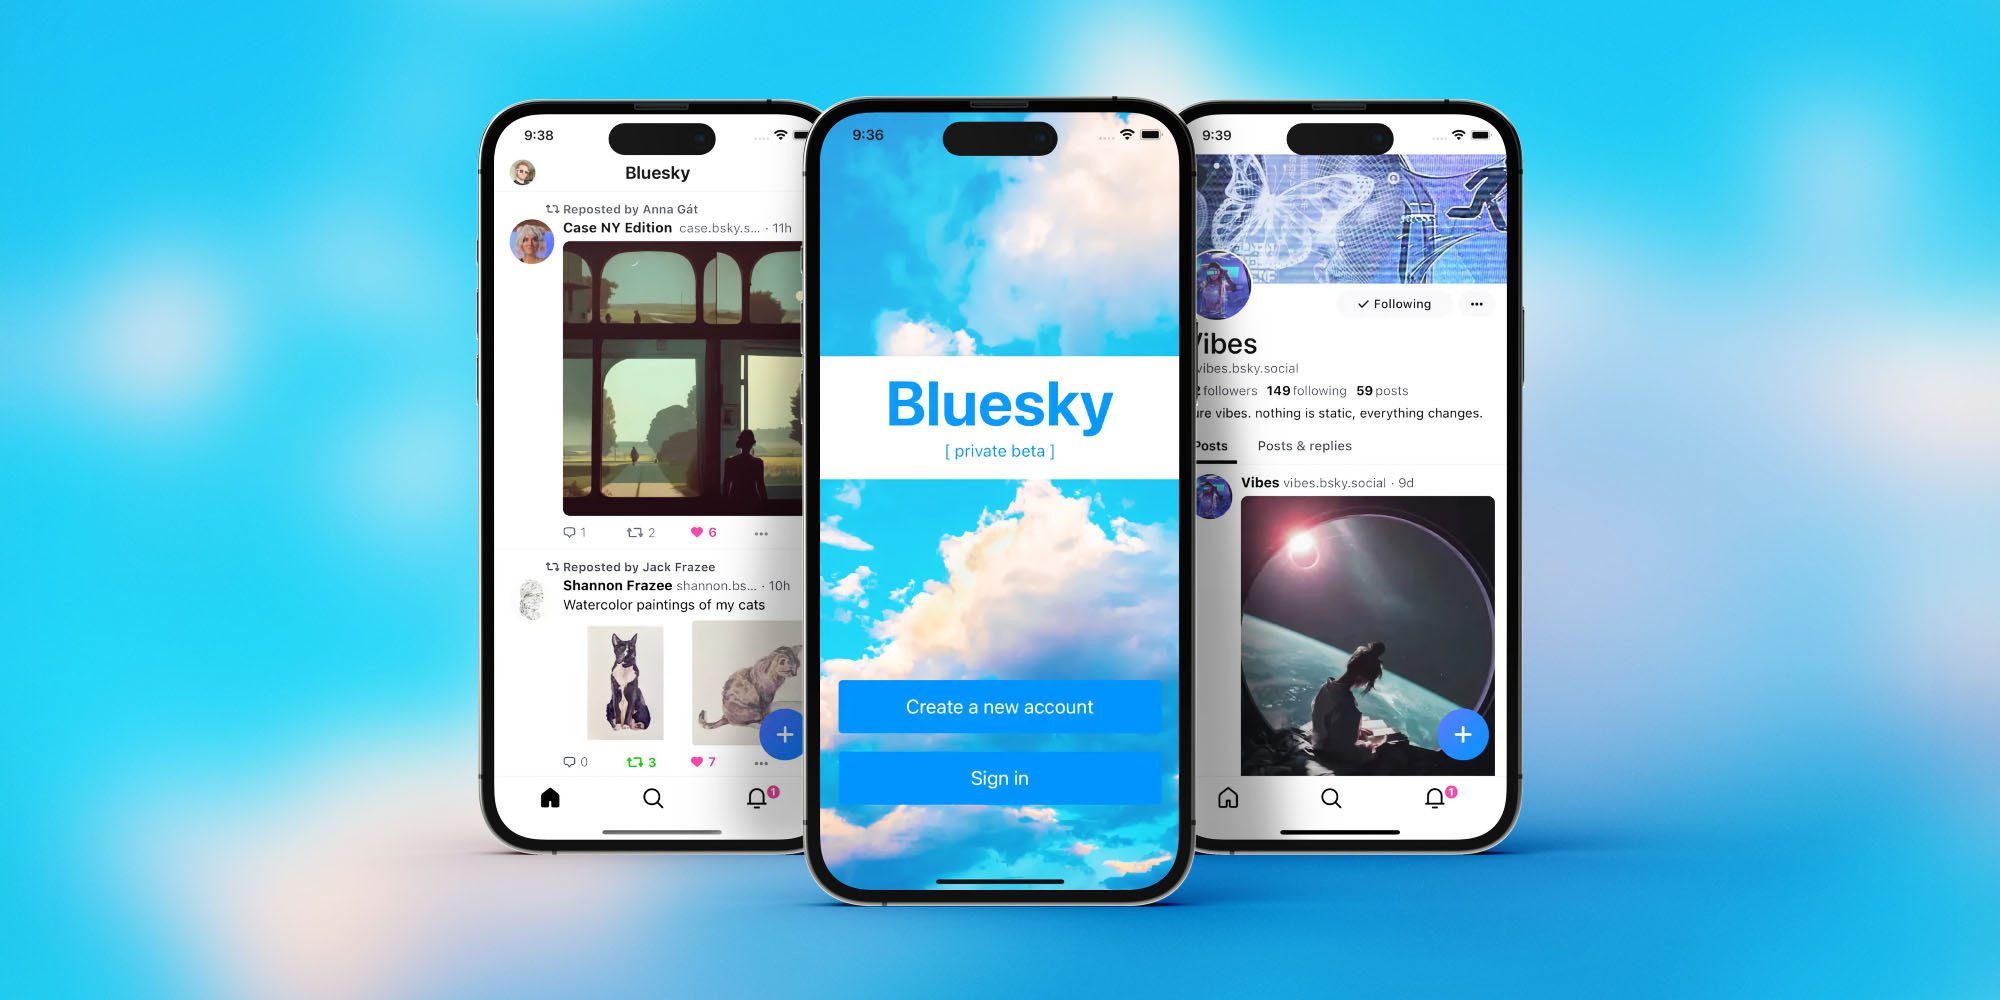 Jack Dorsey’s Twitter competitor ‘Bluesky’ now available on the App Store, but you still need an invite